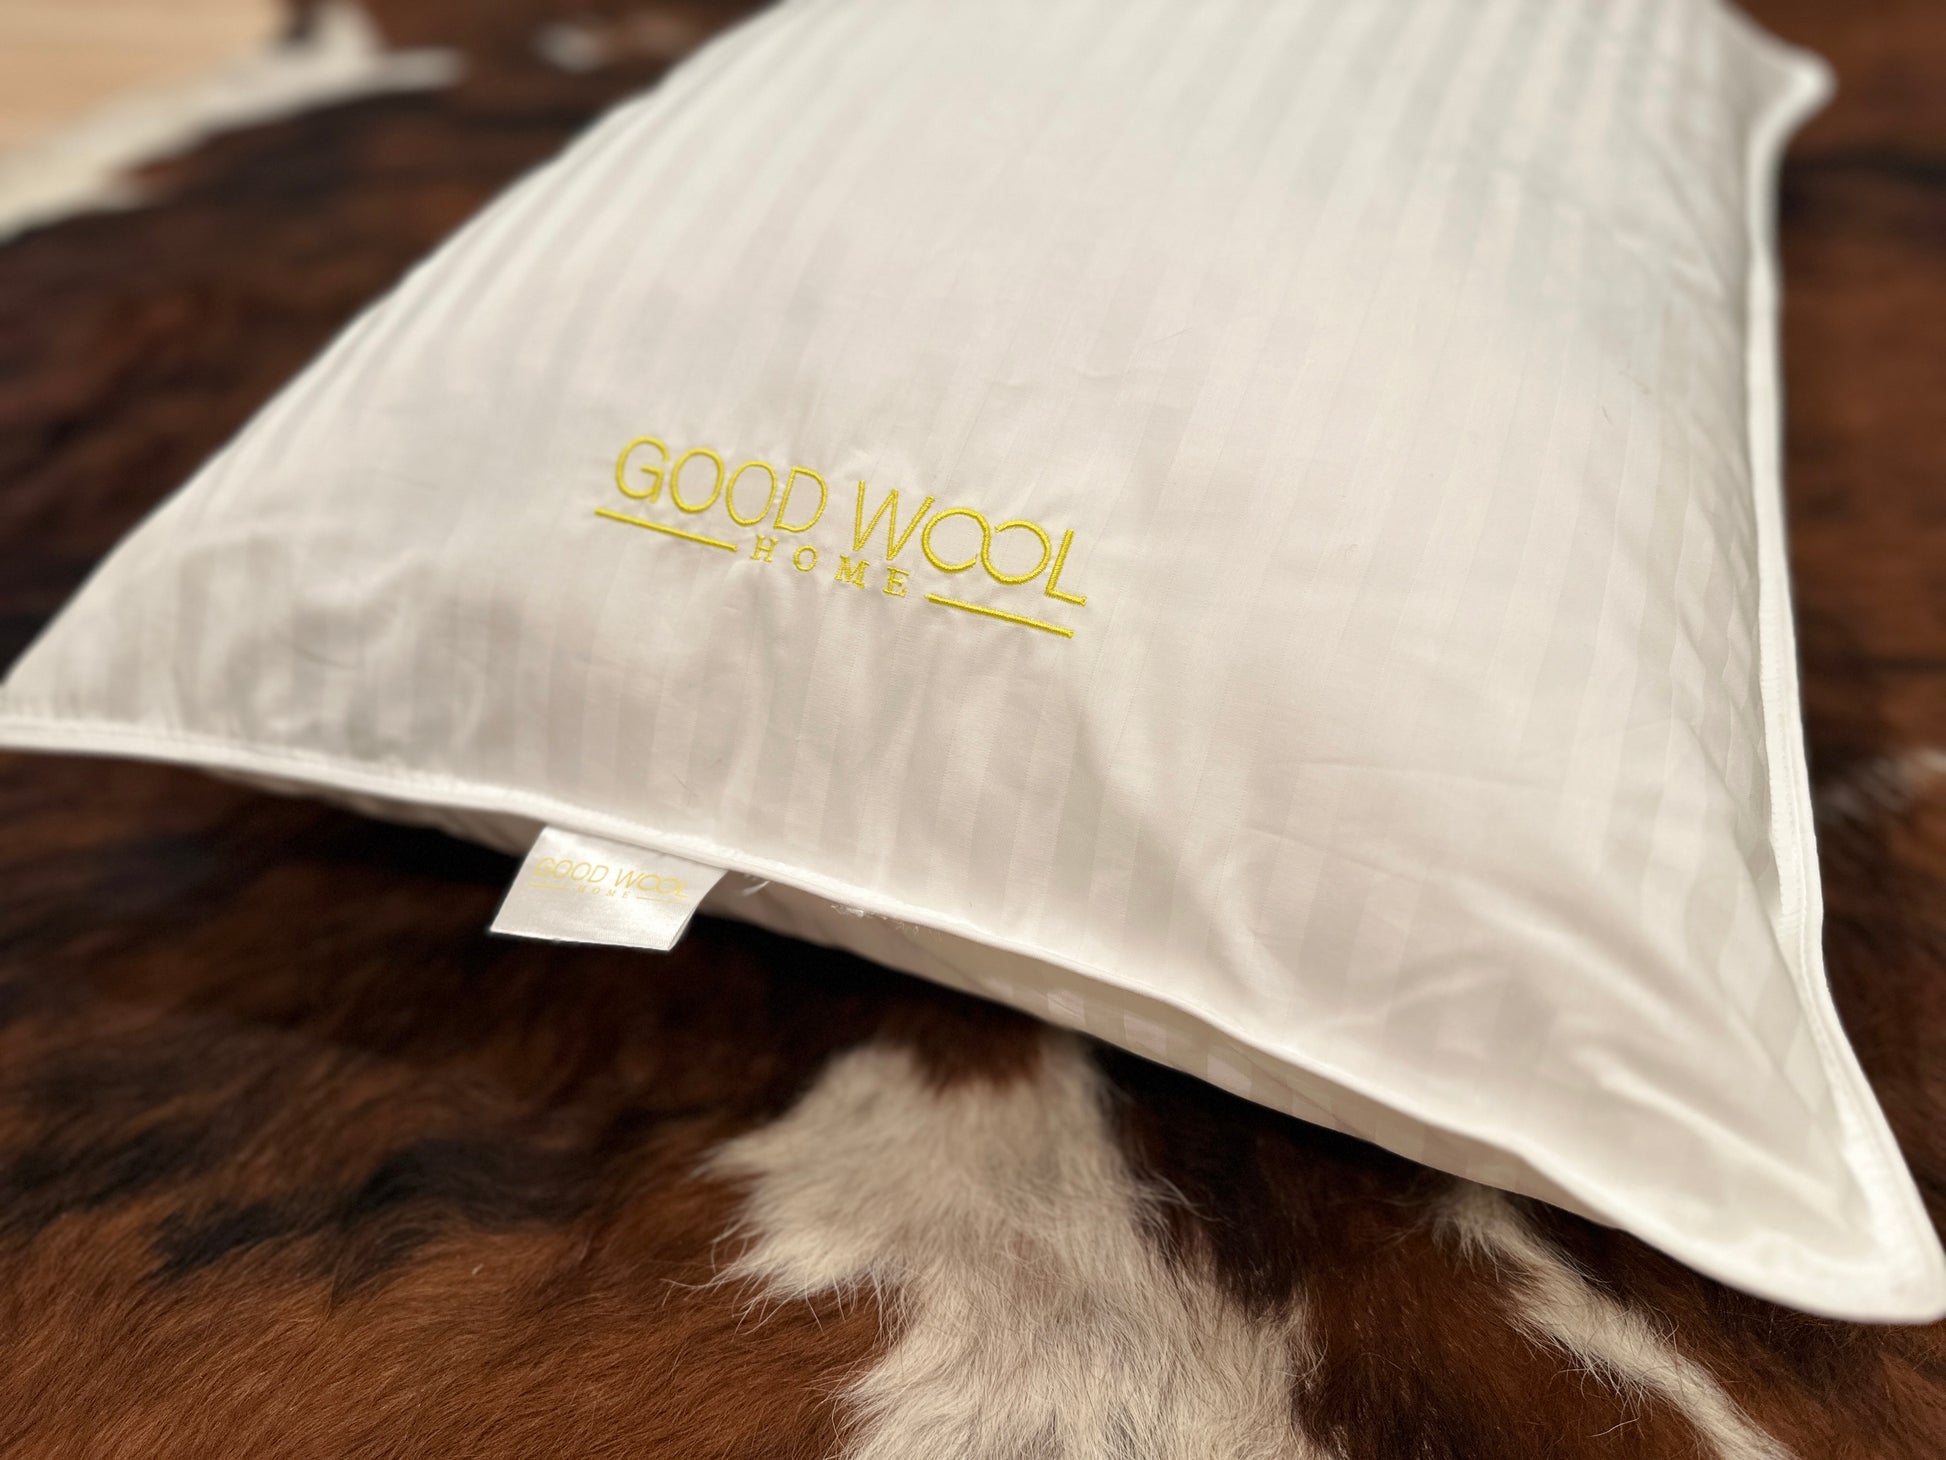 Joma Wool: The Go-To Brand for High-Quality Wool Sleep Products